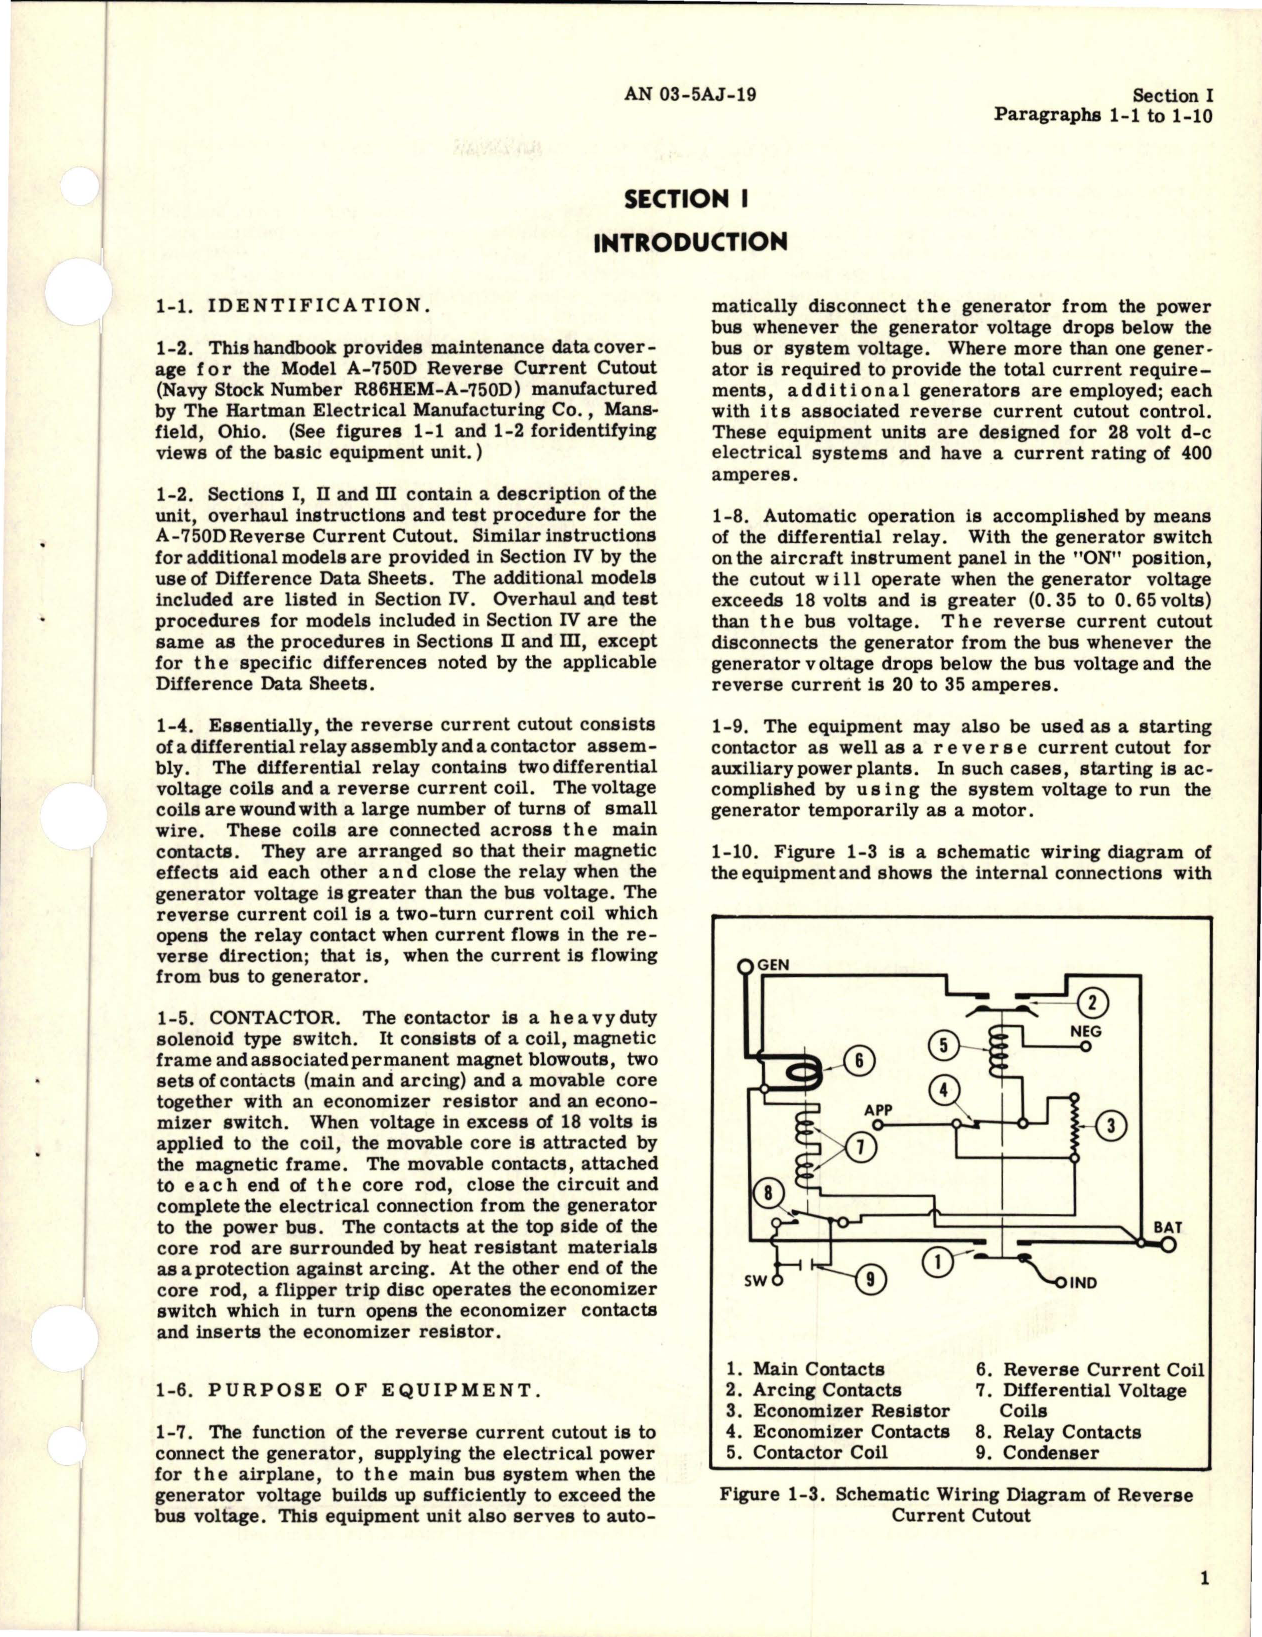 Sample page 5 from AirCorps Library document: Overhaul Instructions for Reverse Current Cutout - Model A-750D, and Contactors - A-751D and A-751E 